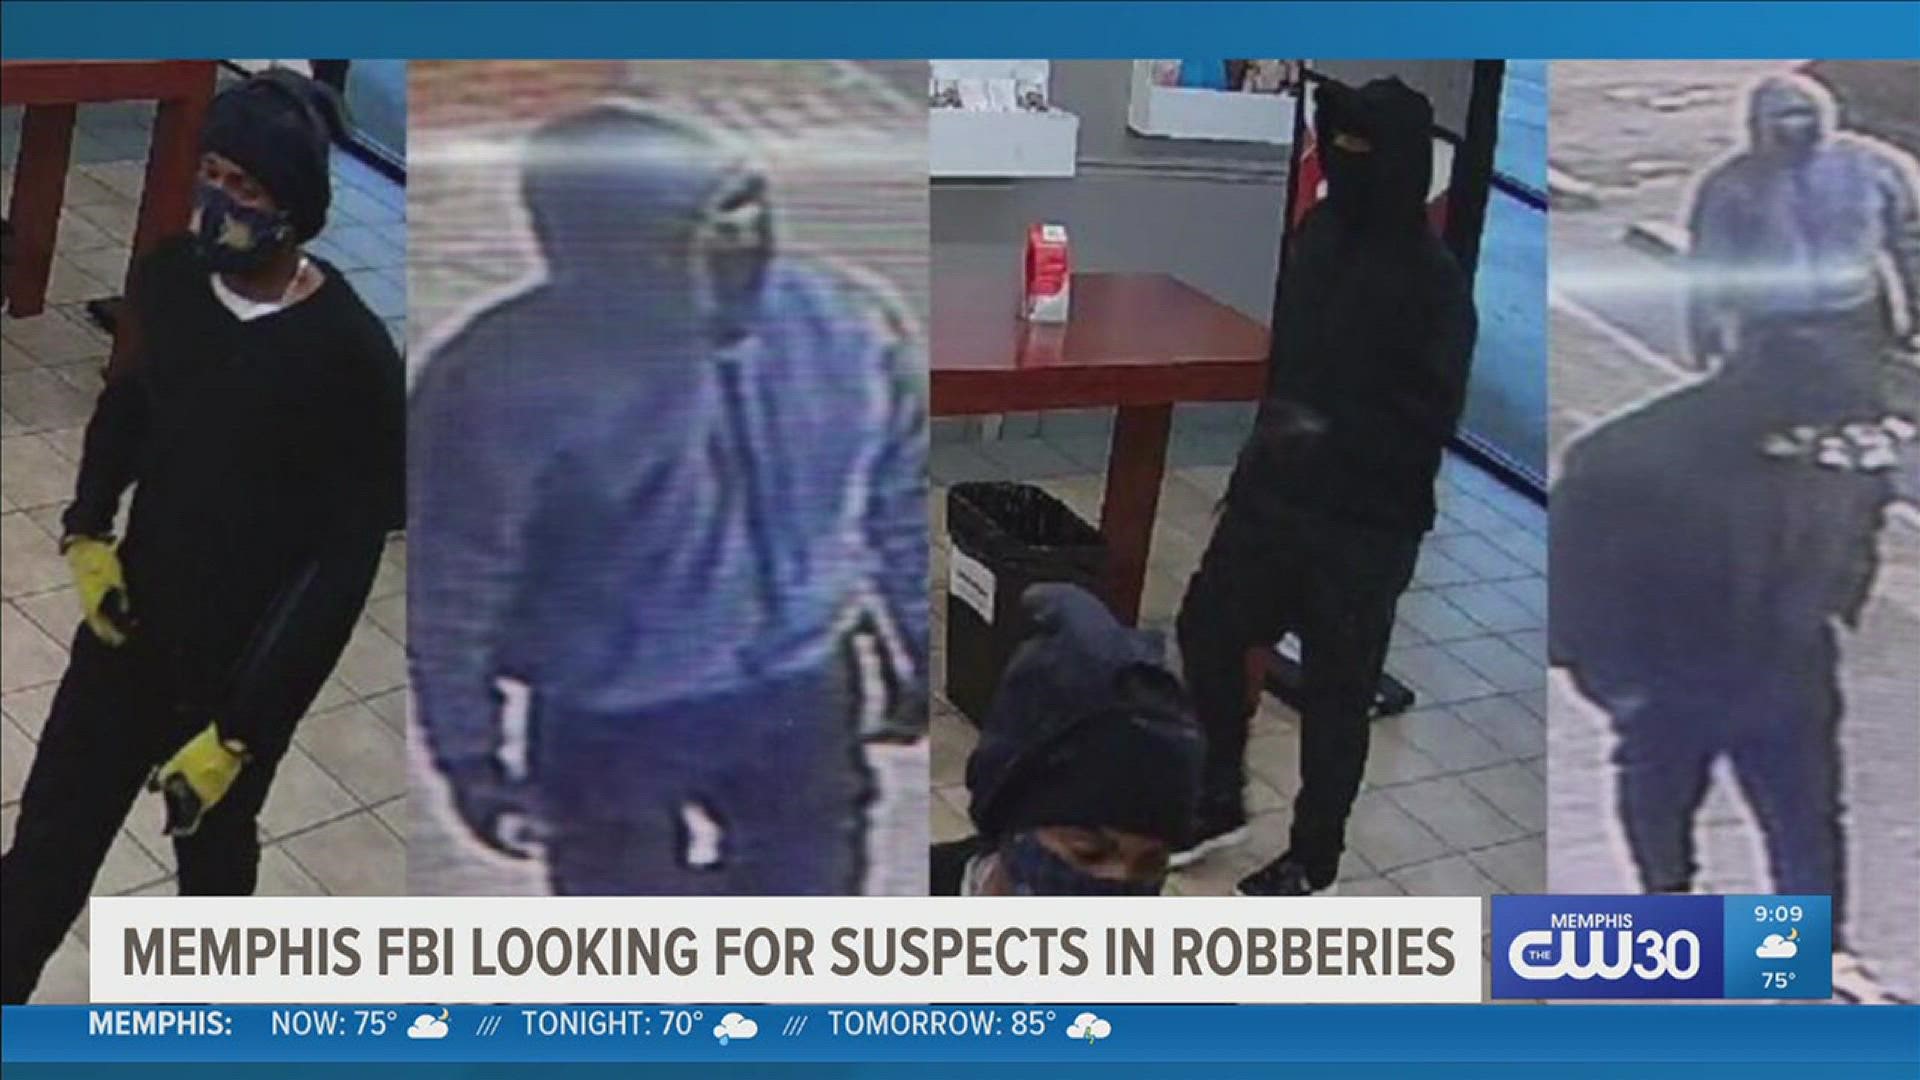 Bank Robbery: What You Need To Know